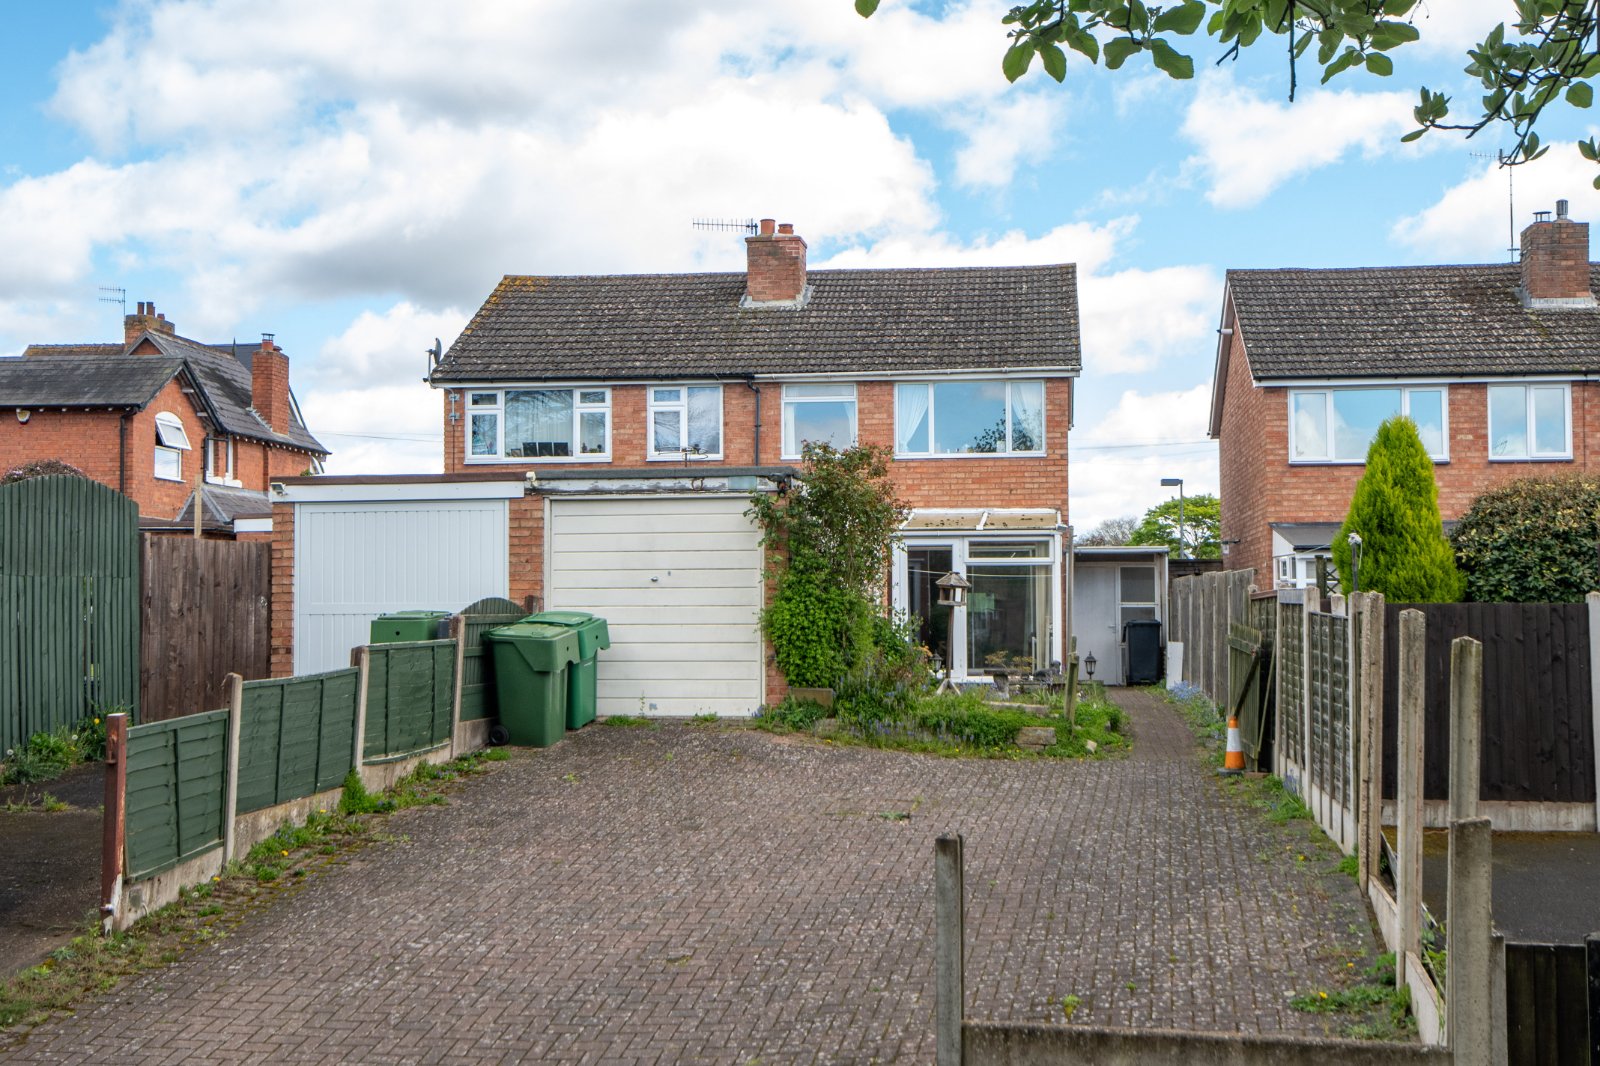 3 bed house for sale in Stourbridge Road, Bromsgrove  - Property Image 2